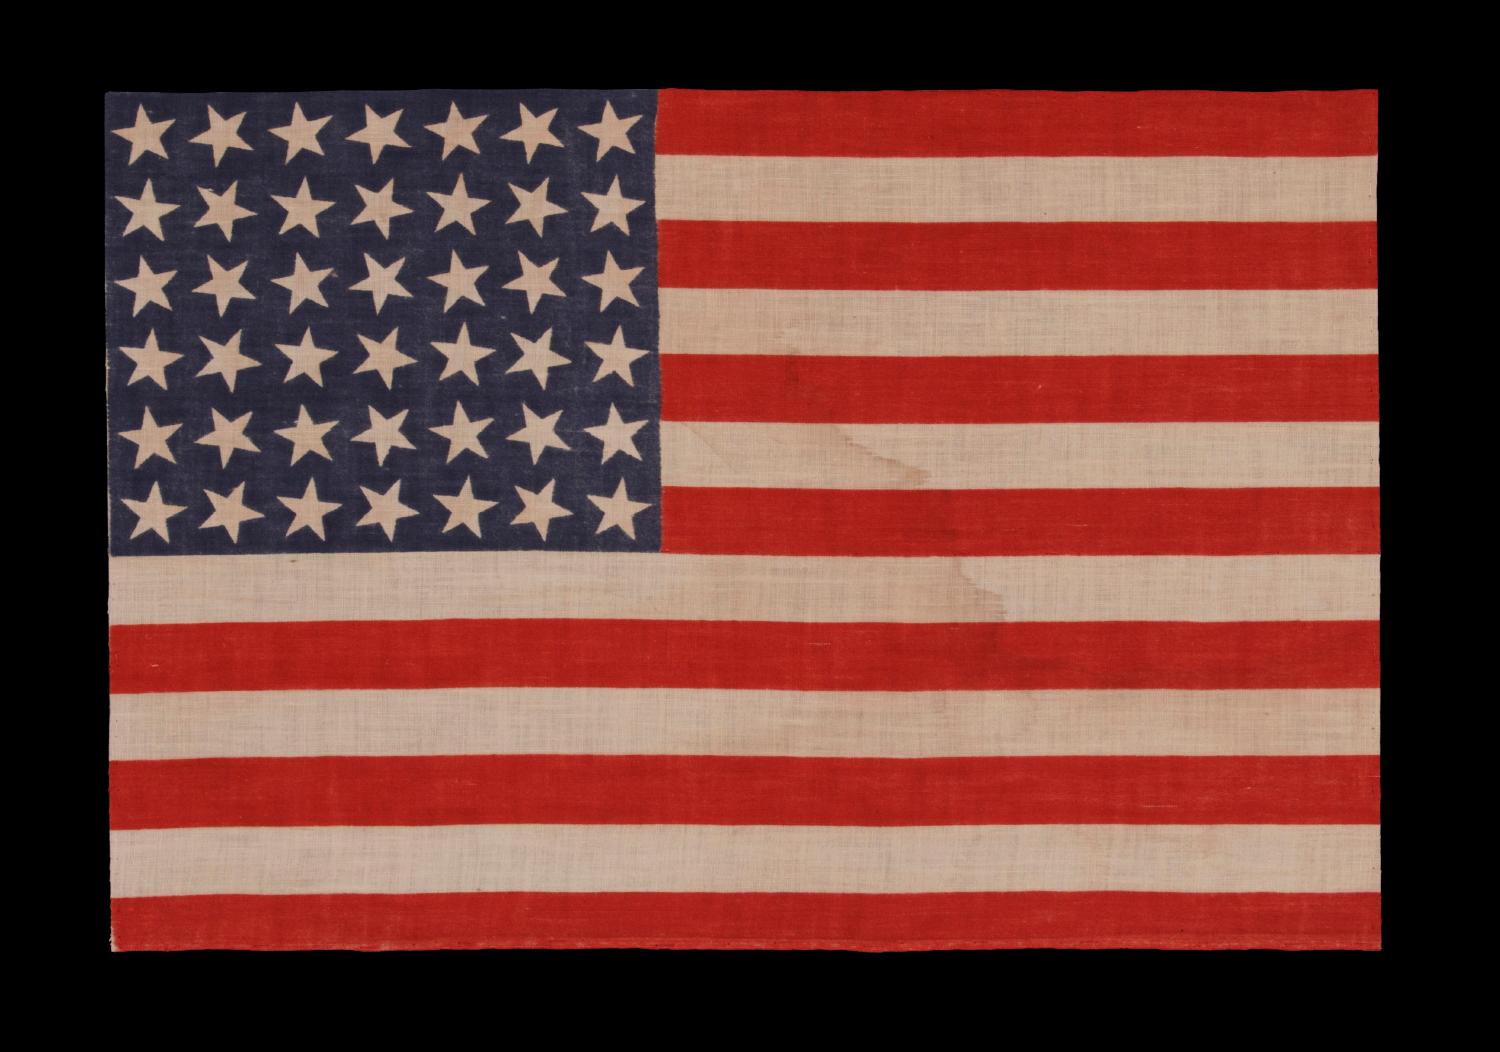 42 stars, an unofficial star count, on an antique American flag with scattered star positioning, 1889-1890, Washington Statehood:

42 star parade flag, printed on cotton muslin. The stars are arranged in a rectilinear fashion, but vary in position